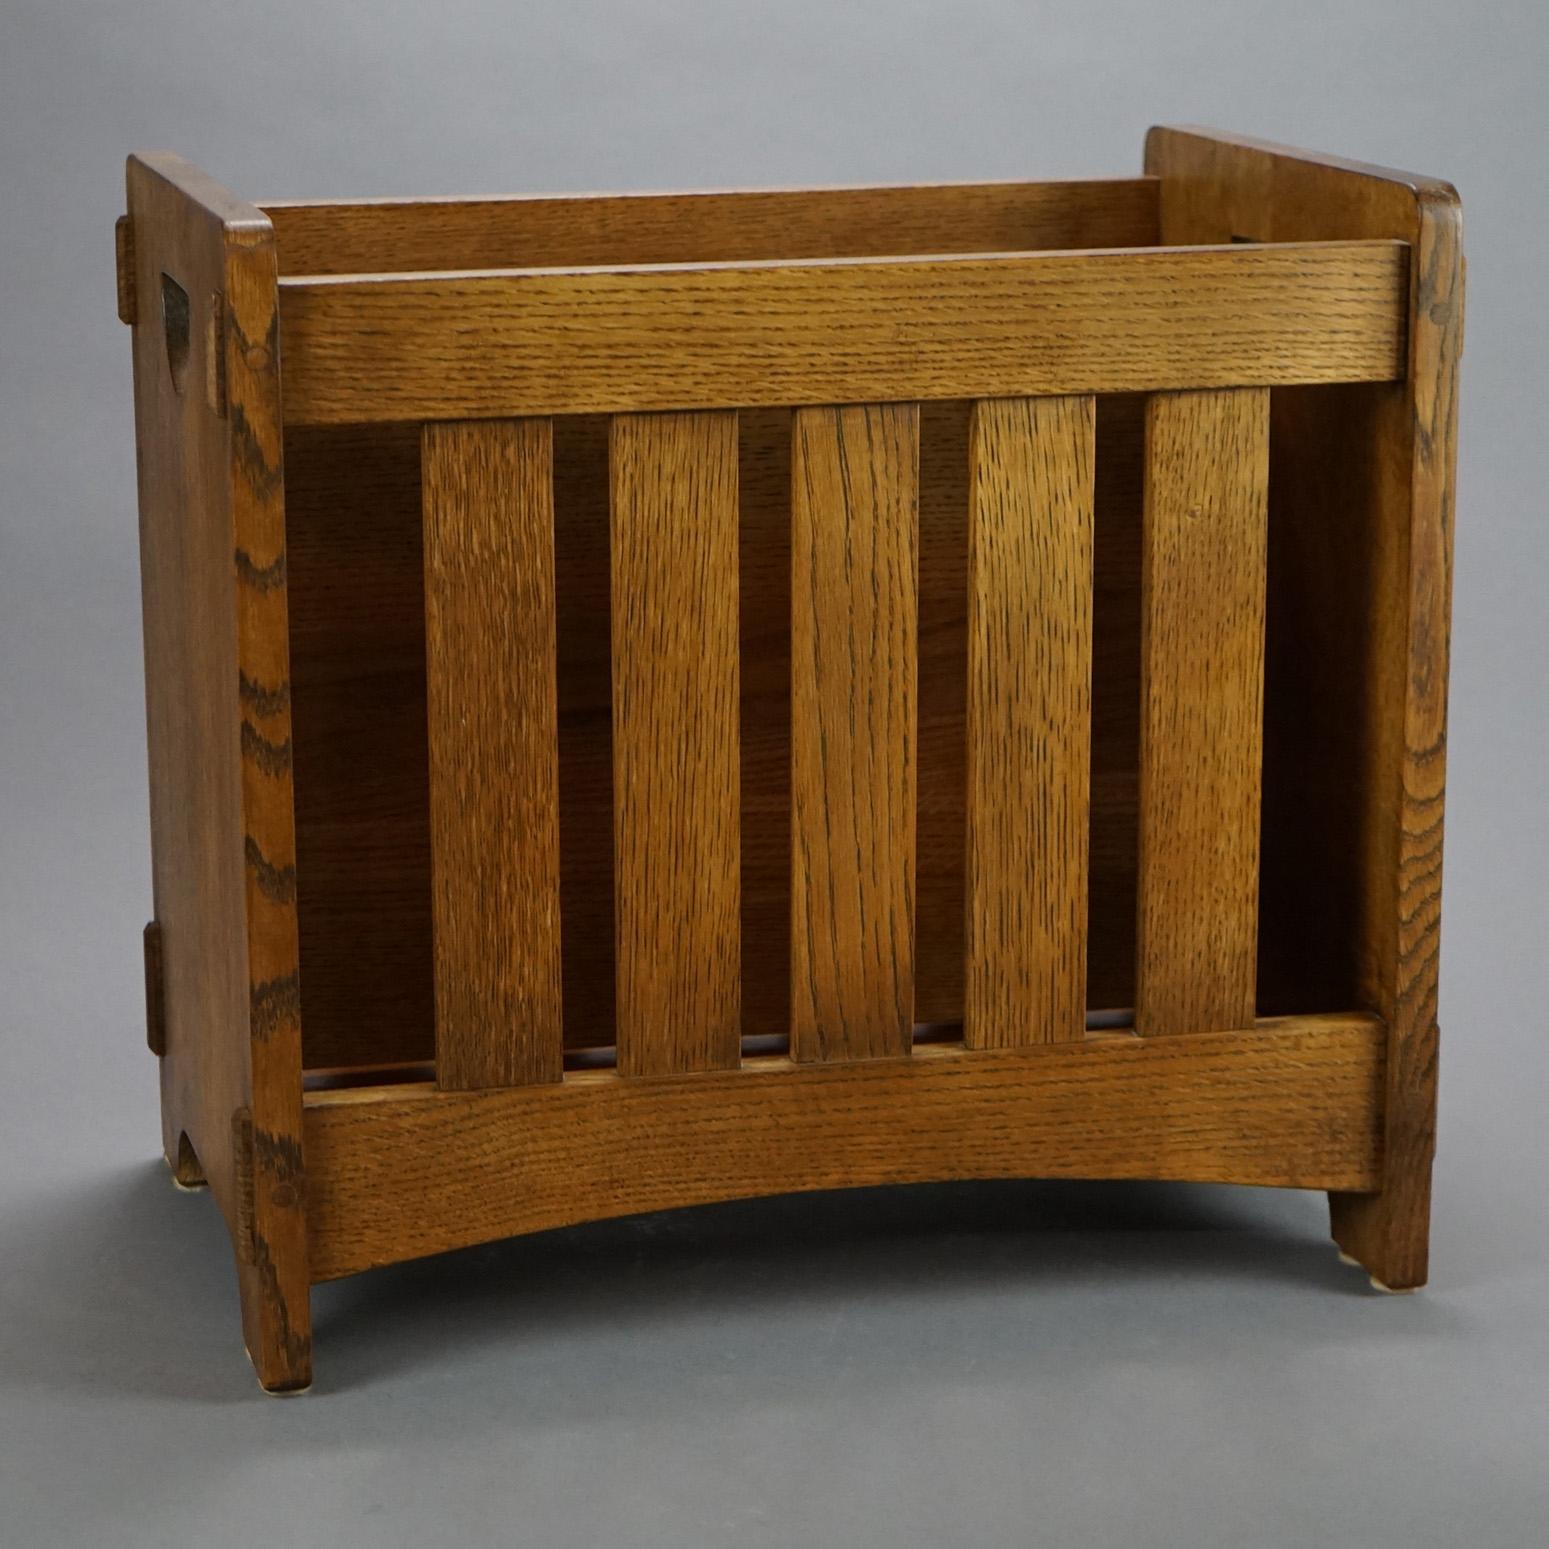 An Arts & Crafts magazine rack by Stickley offers oak construction with slat sides enclosing a divided interior; sides with cutout handles; maker mark as photographed; 20th century

Measures- 17''H x 18.5''W x 12''D.